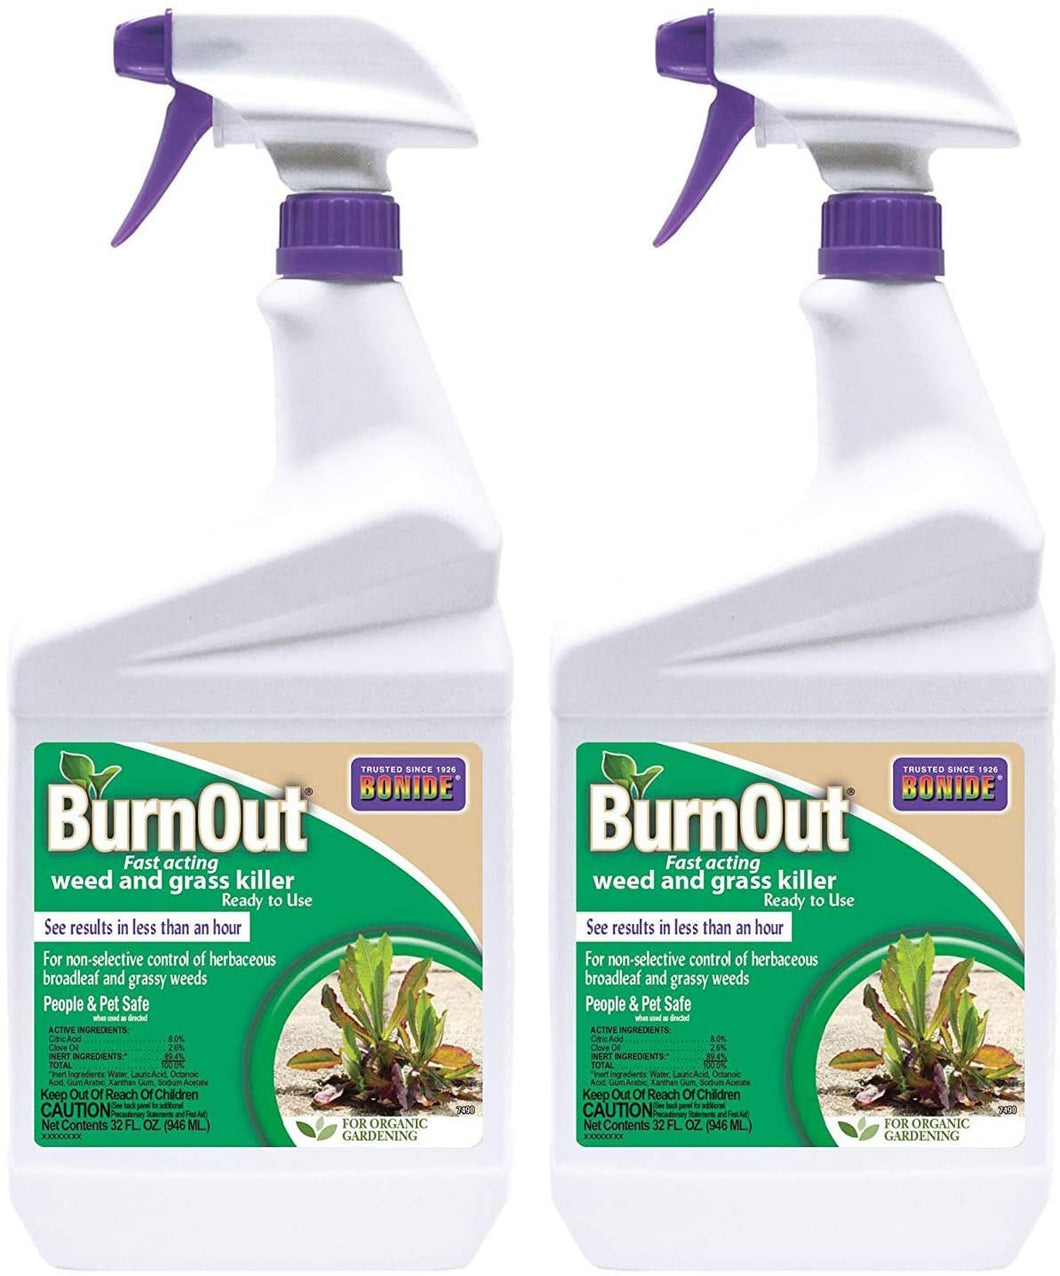 Bonide 7490 037321074908 Burn Out Weed and Grass Killer, 32 oz (Pack of 2)